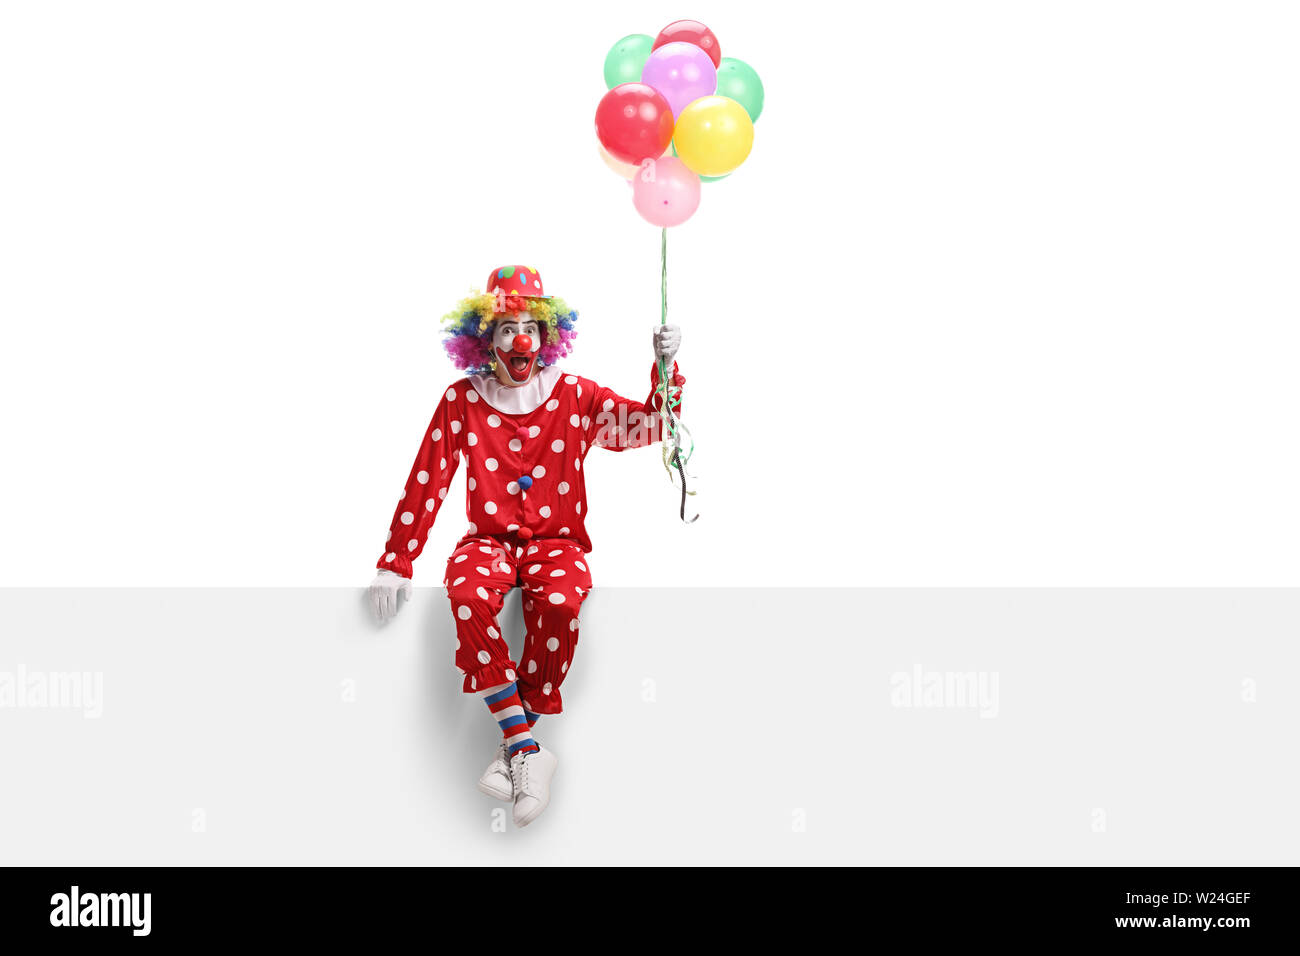 Full length shot of a cheerful clown sitting on a white banner and holding a bunch of balloons isolated on white background Stock Photo